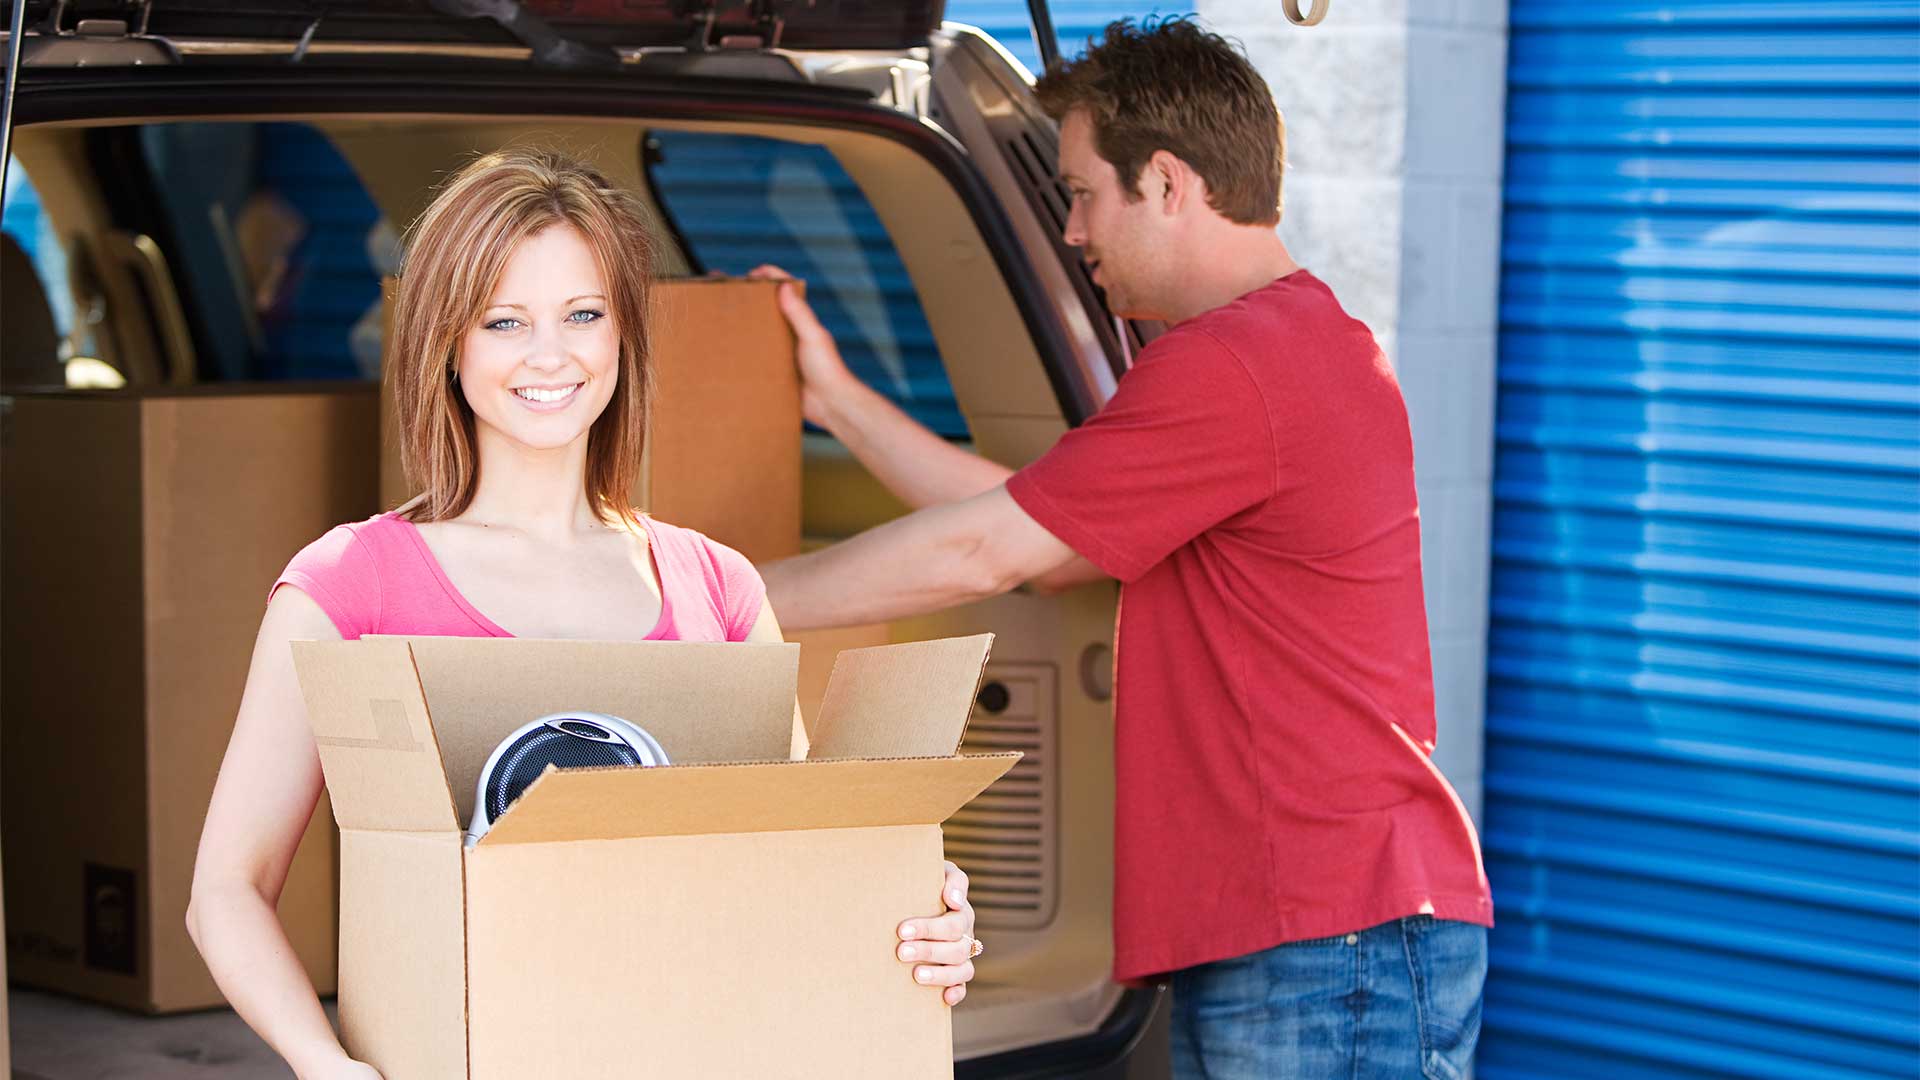 Woman and man unloading boxes from back of car for self storage